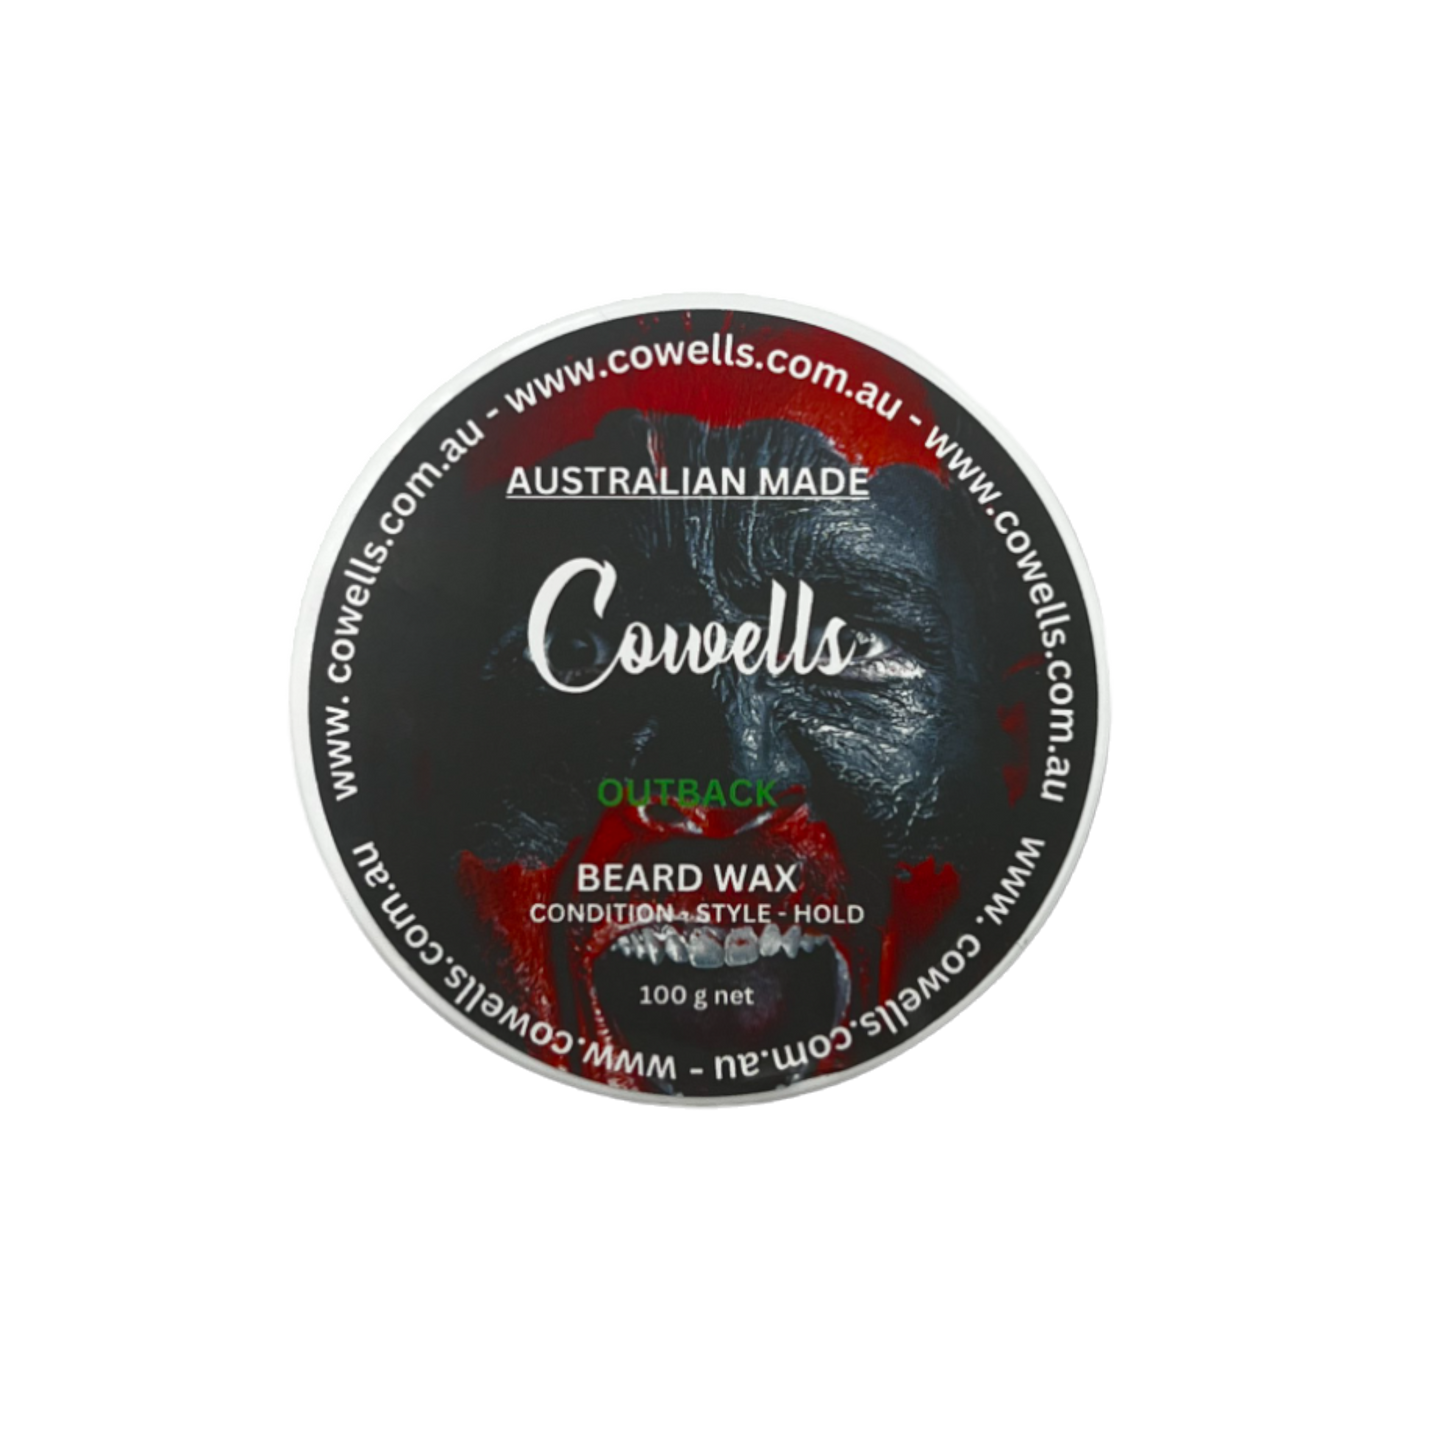 Outback scented beard wax